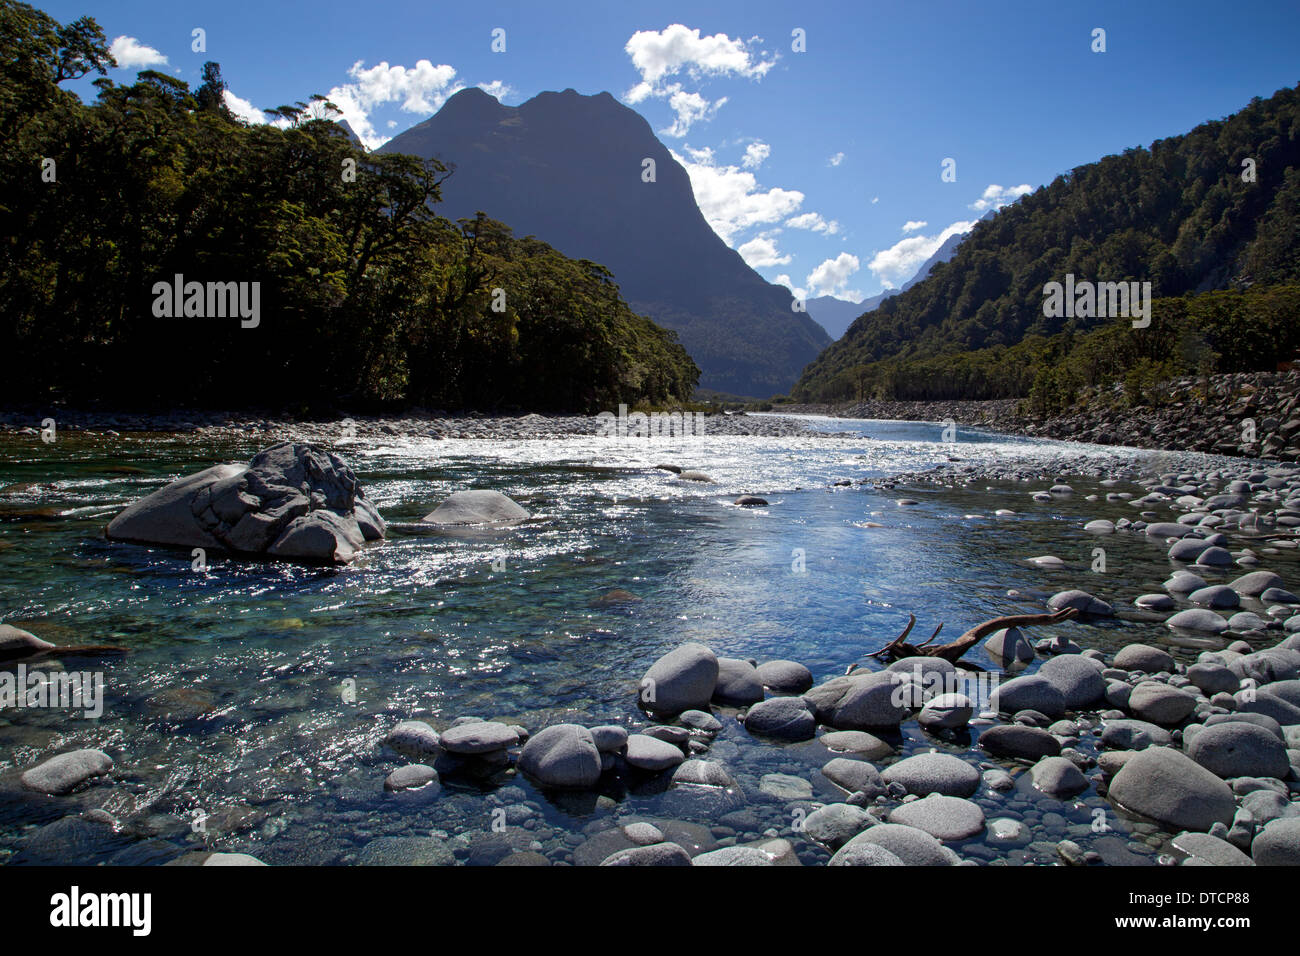 River leading to Milford Sound, Fiordland, South Island, New Zealand Stock Photo